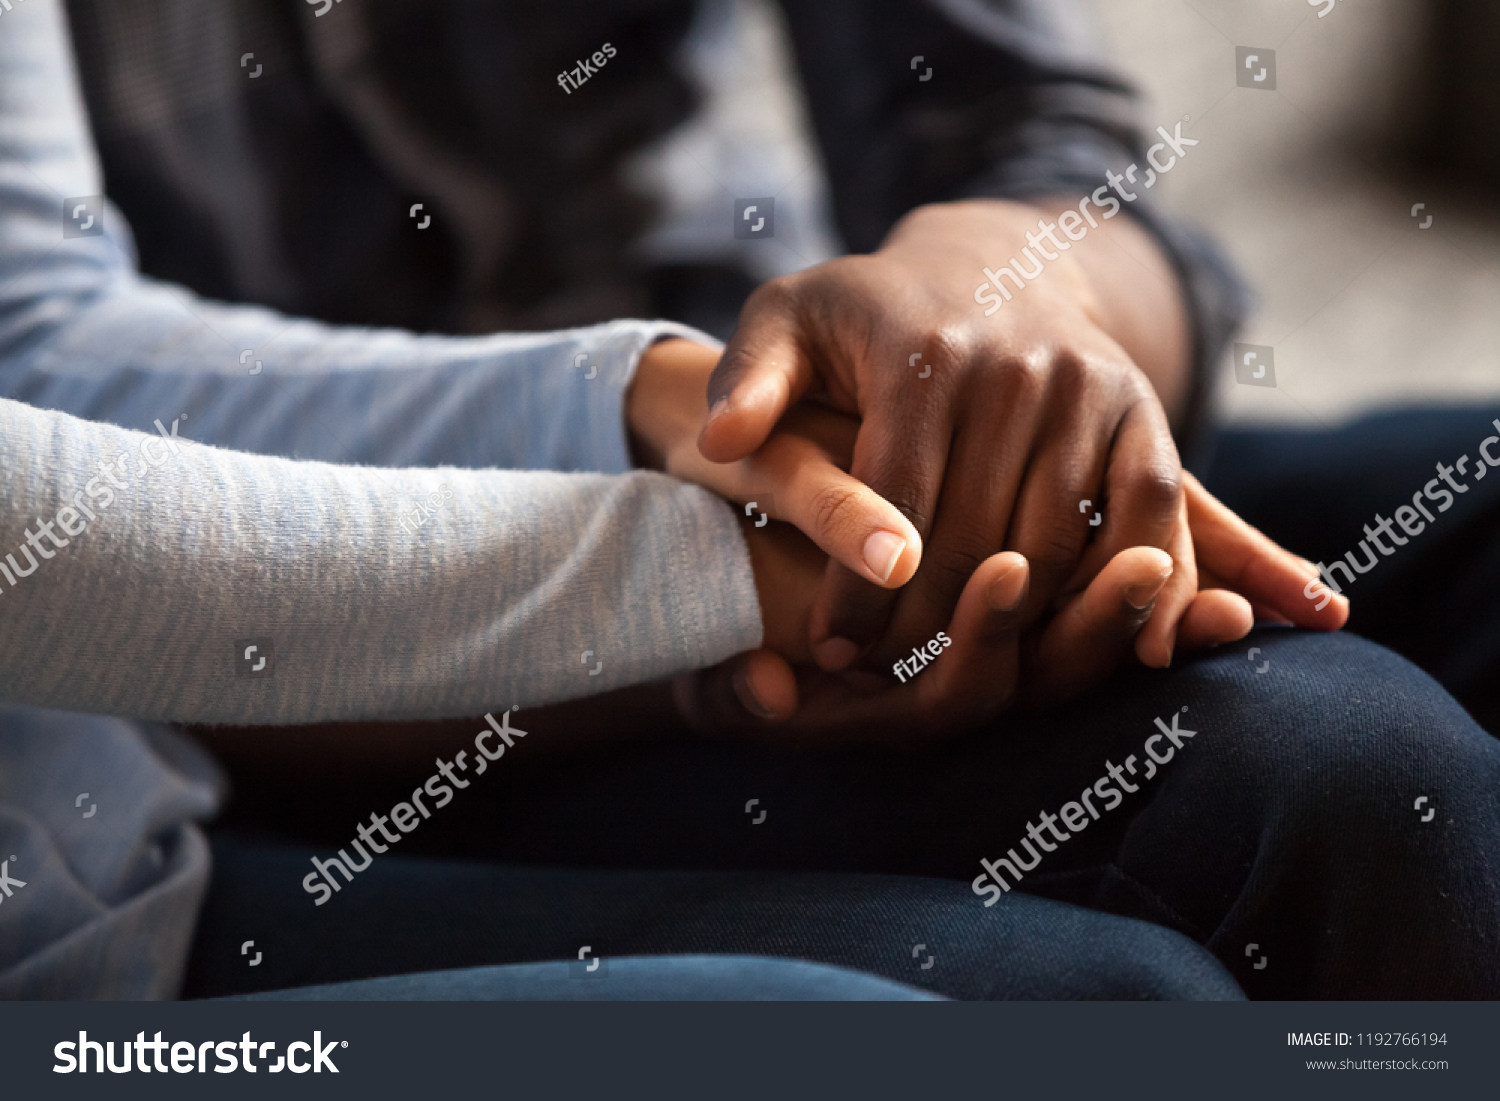 ¿Hermana? [0/1] Stock-photo-close-up-black-woman-and-man-in-love-sitting-on-couch-two-people-holding-hands-symbol-sign-sincere-1192766194